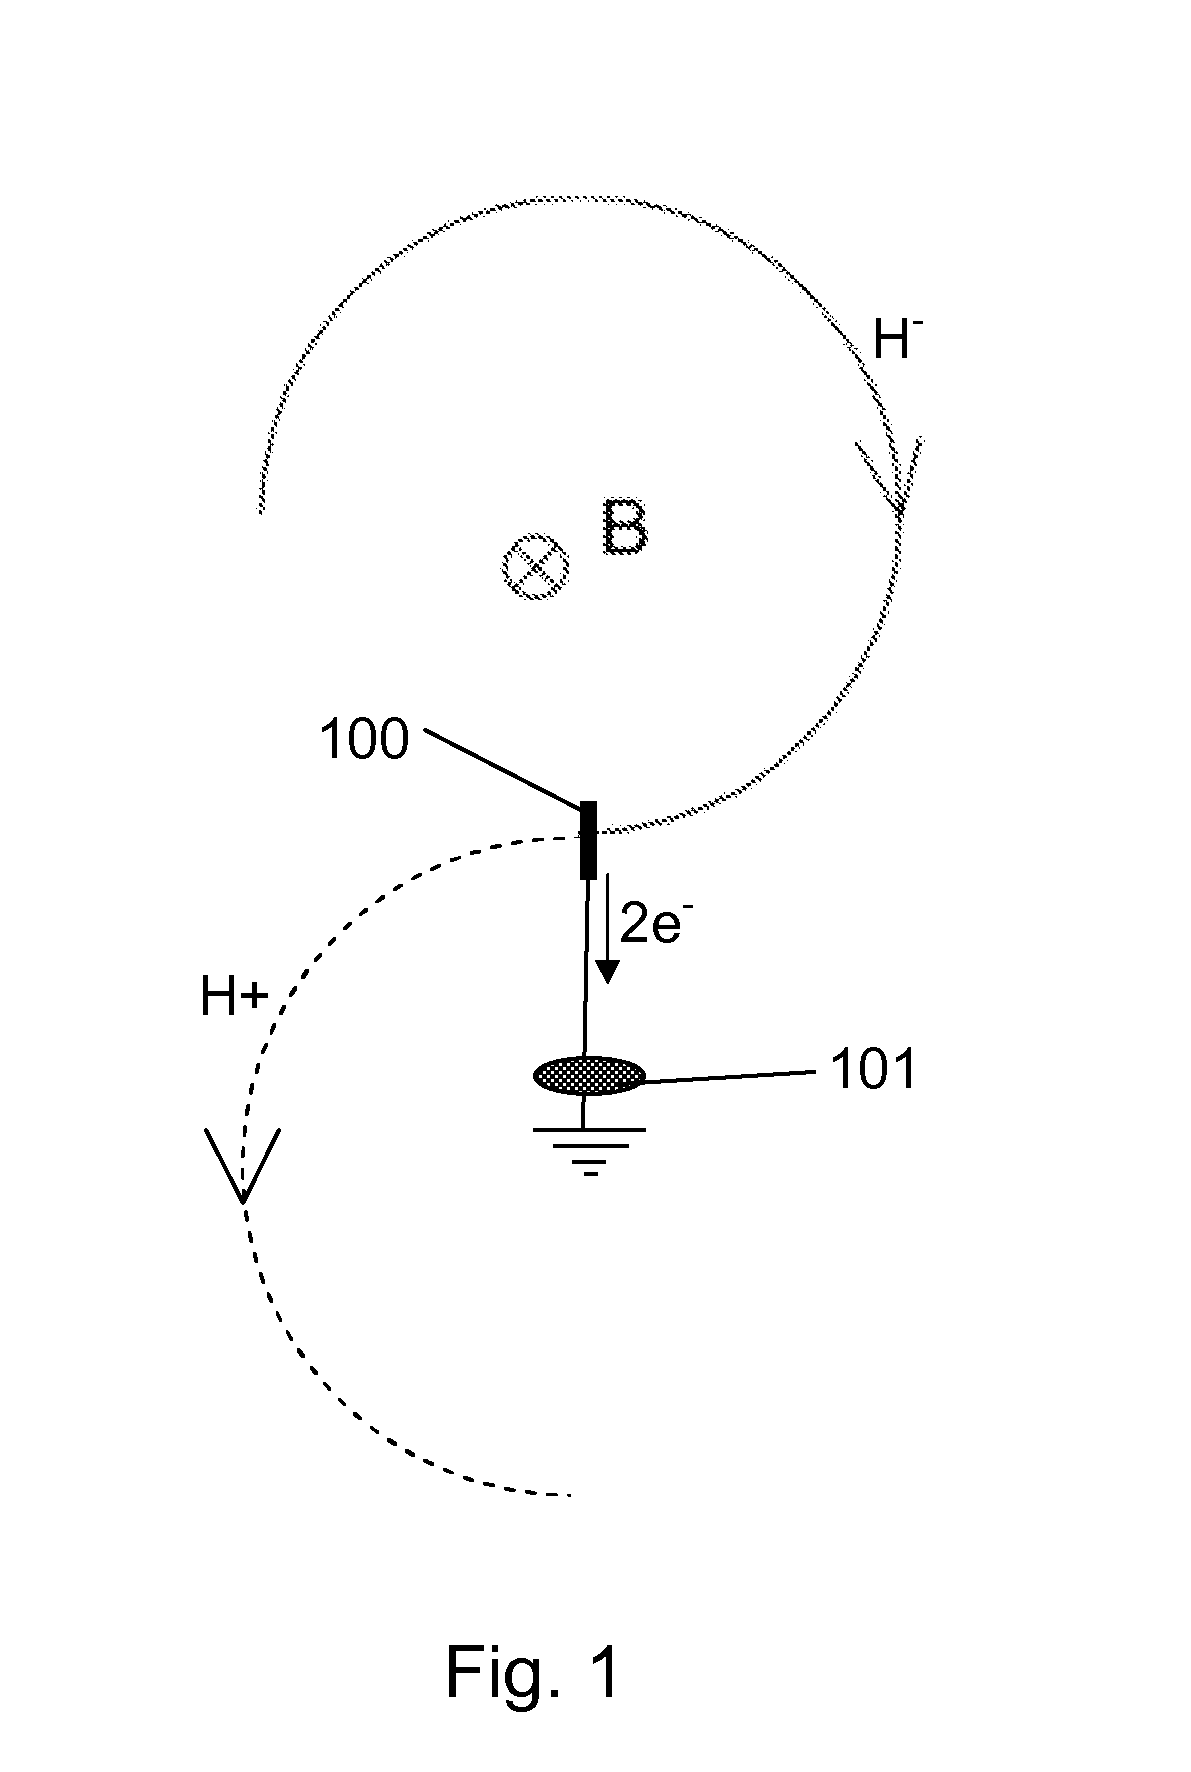 Stripping Member, A Stripping Assembly And A Method For Extracting A Particle Beam From A Cyclotron